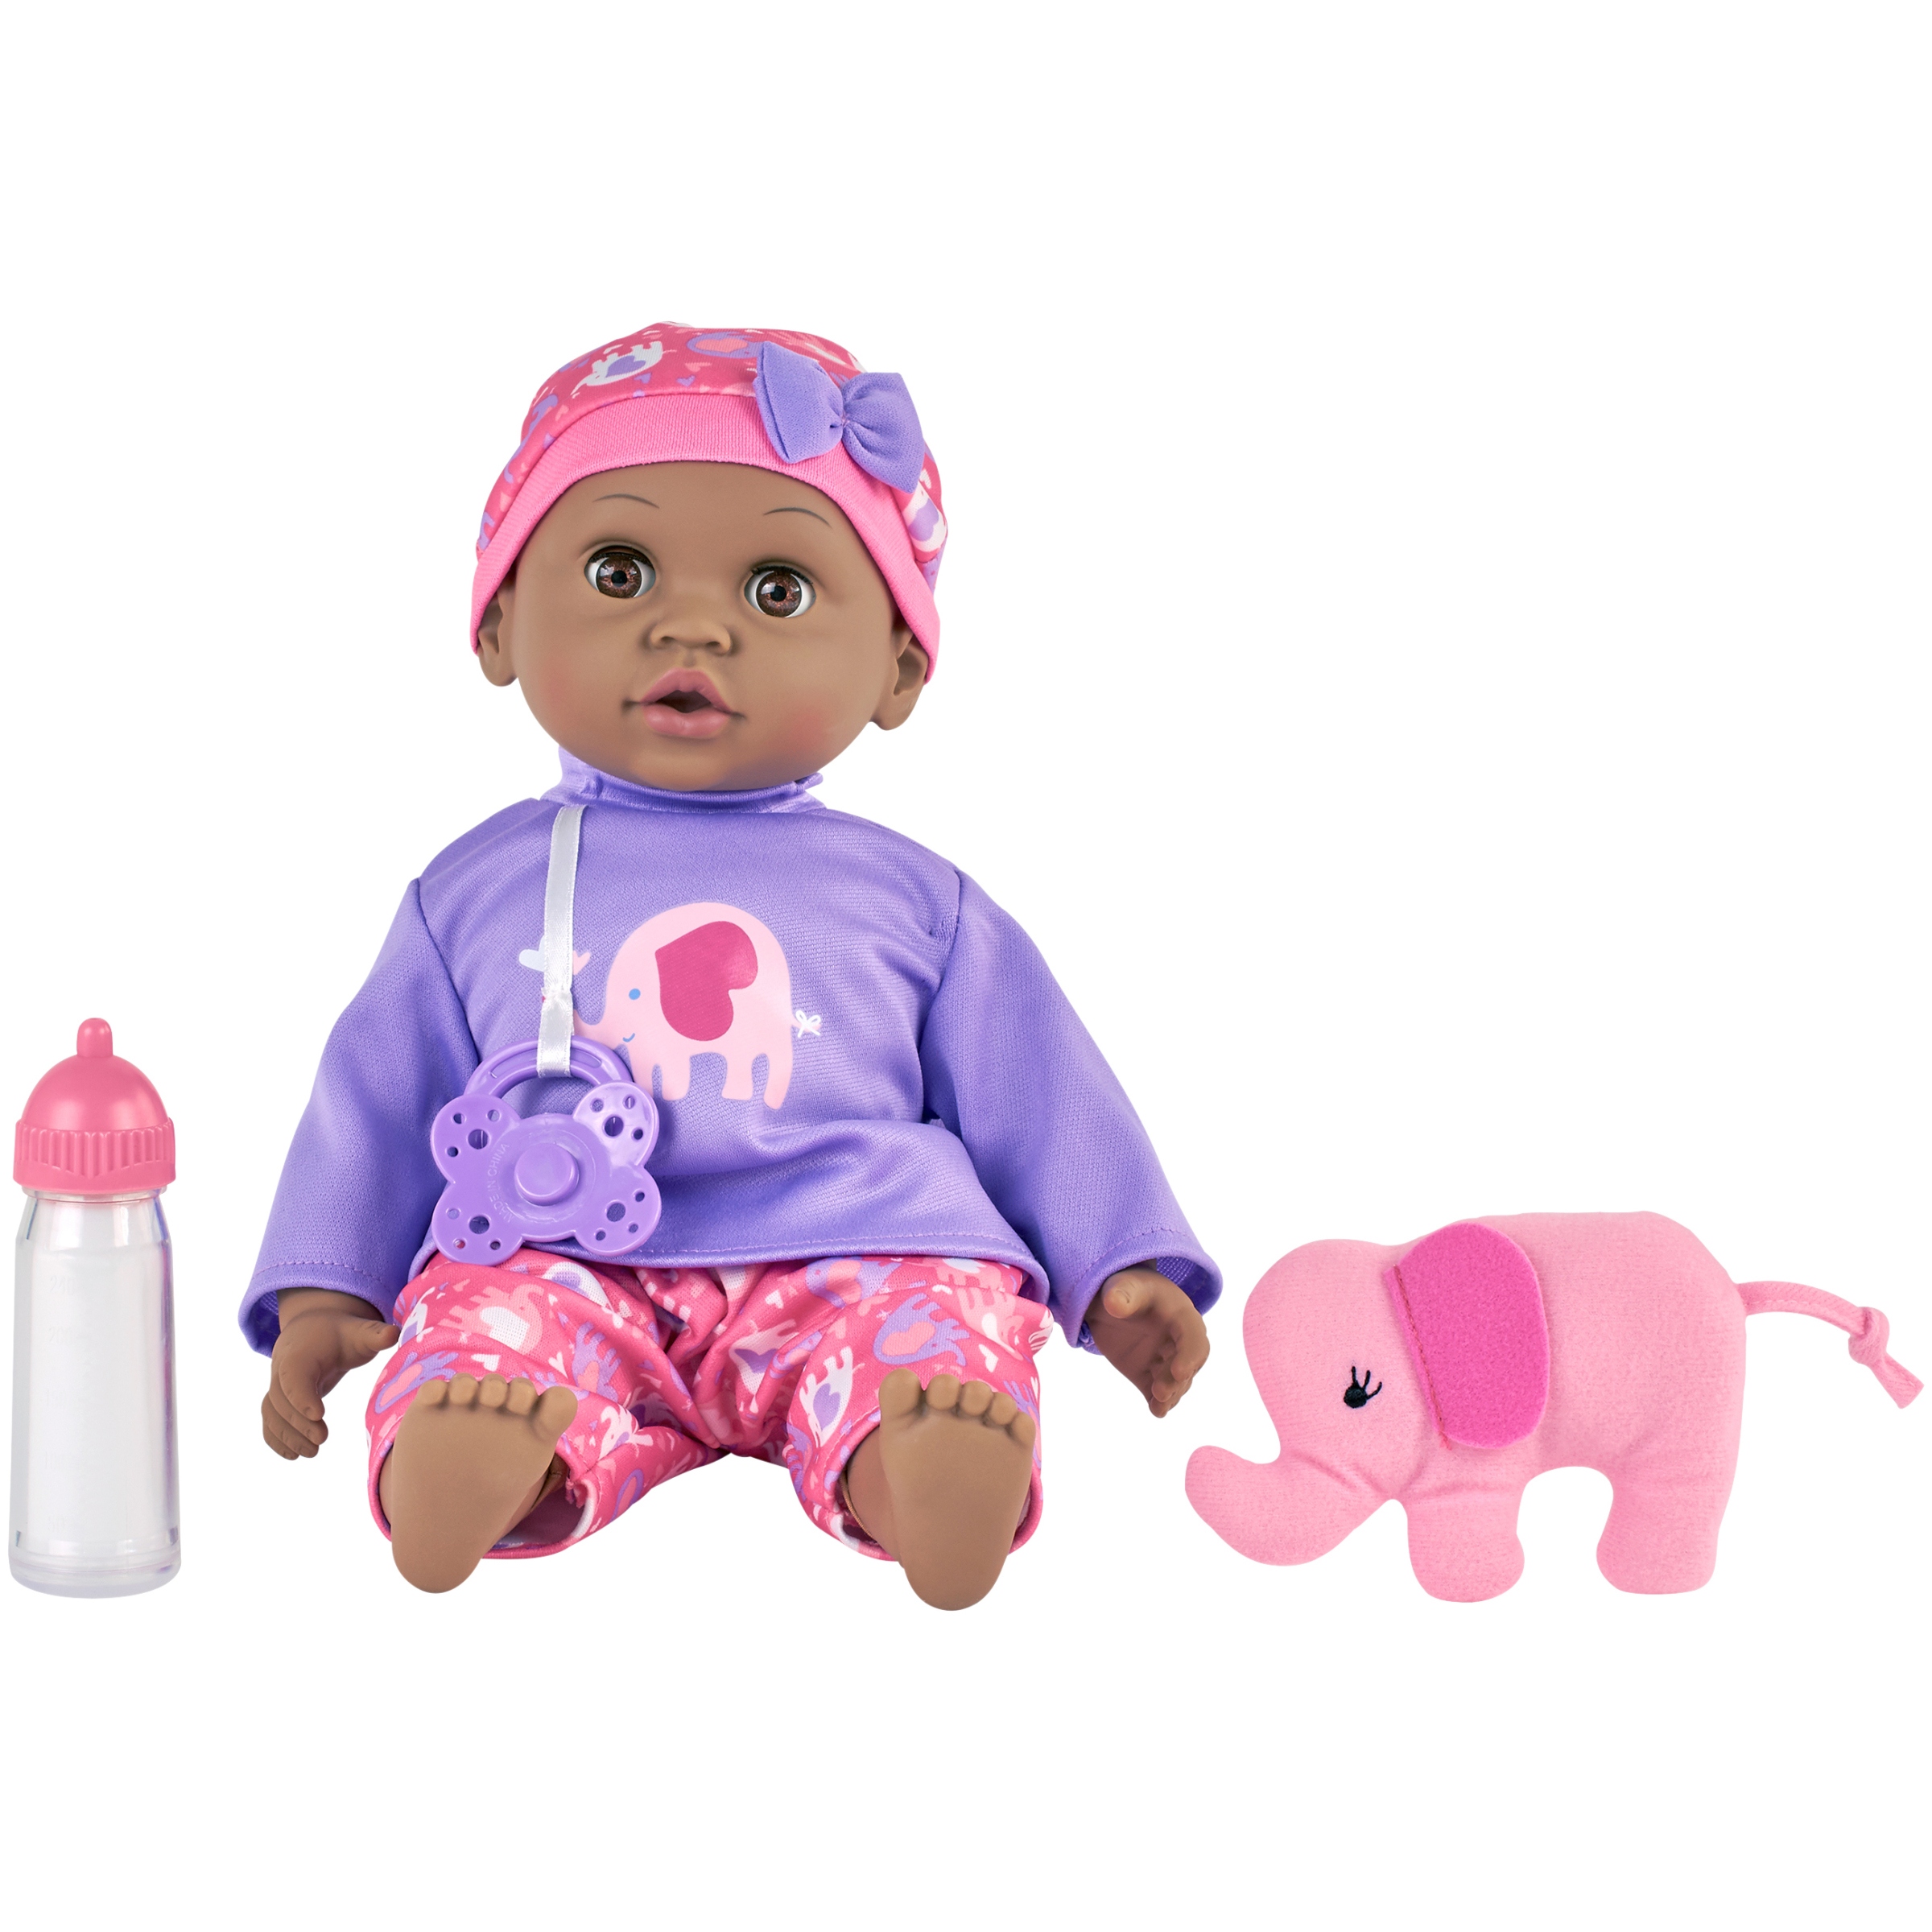 My Sweet Love® Baby Doll & Accessories 4 pc Box, Brown Eyes - image 1 of 4